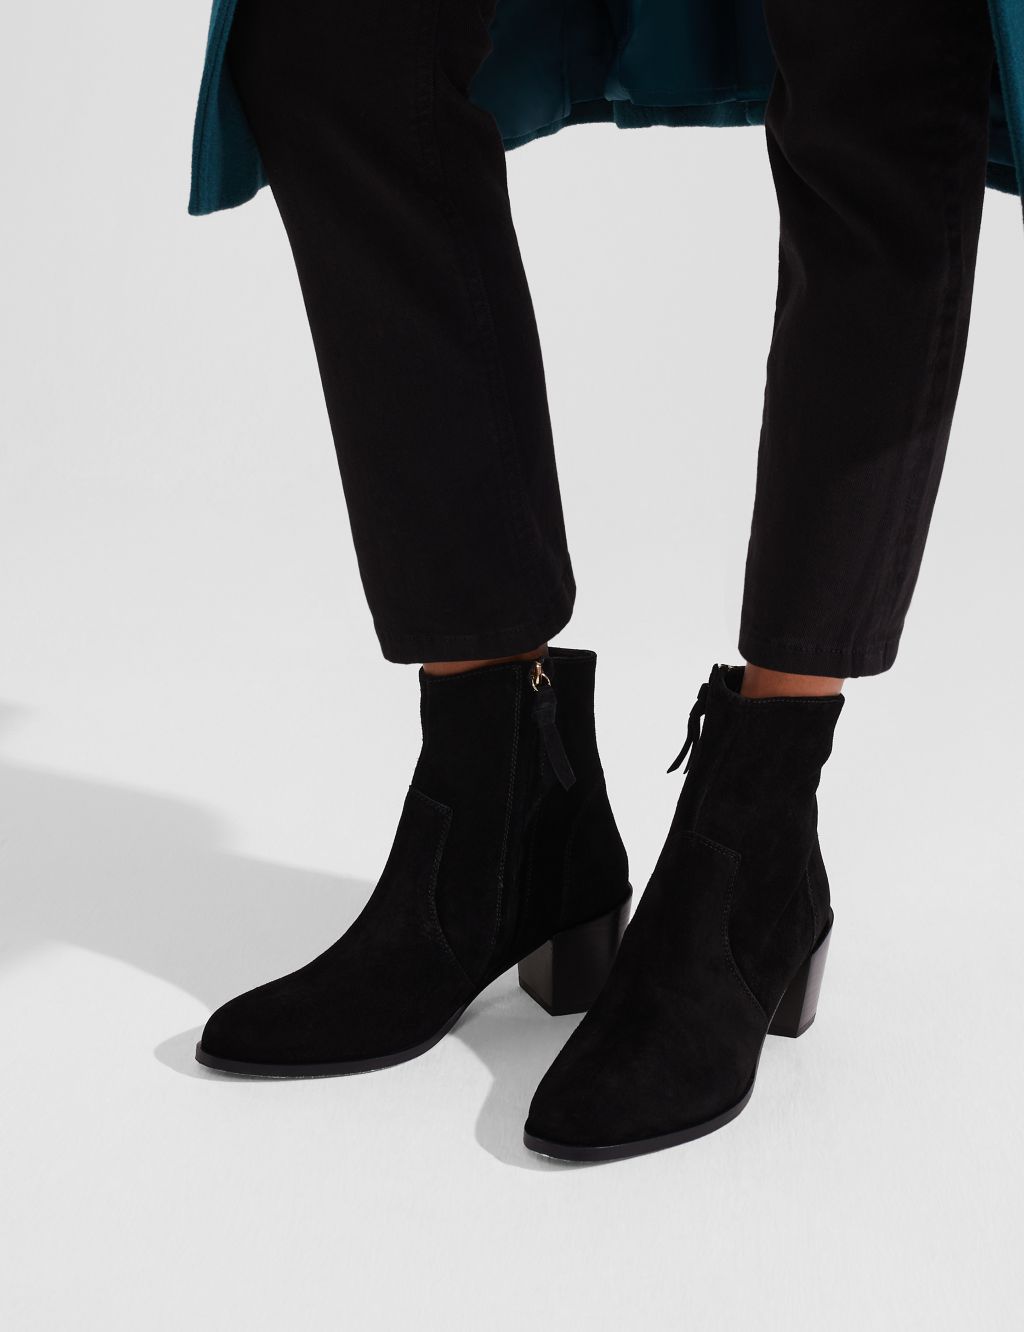 Suede Block Heel Round Toe Ankle Boots image 1